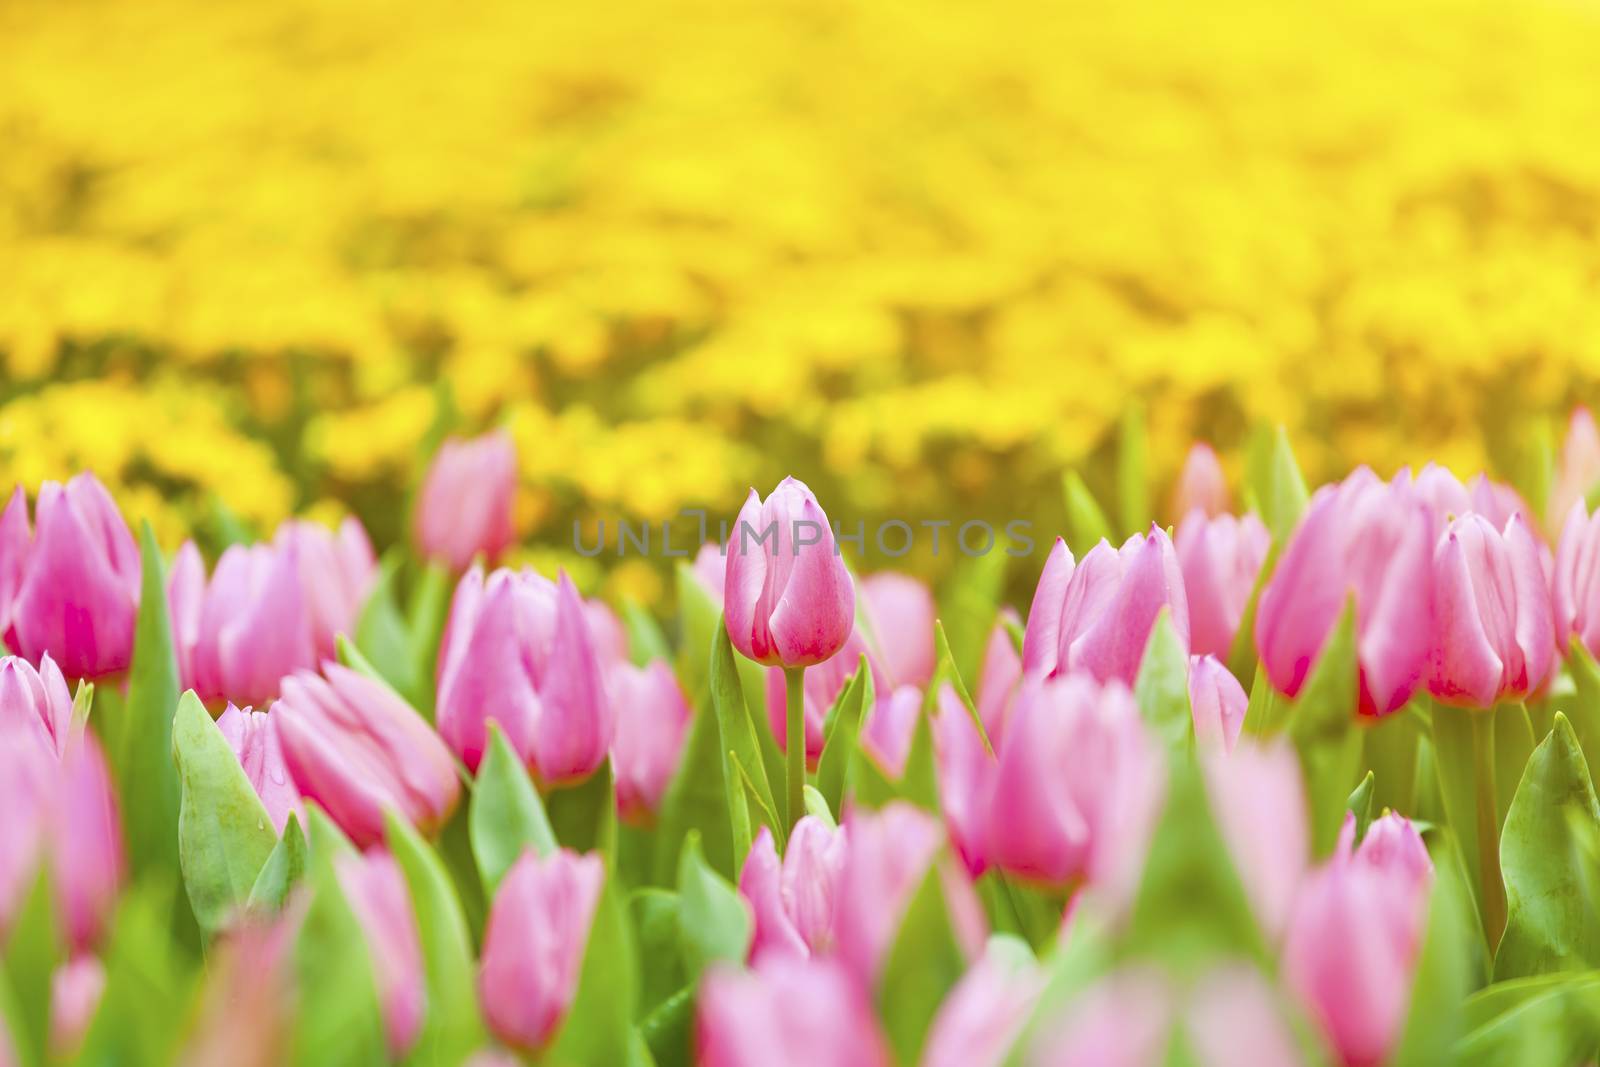 Tulips blossom in spring by kawing921